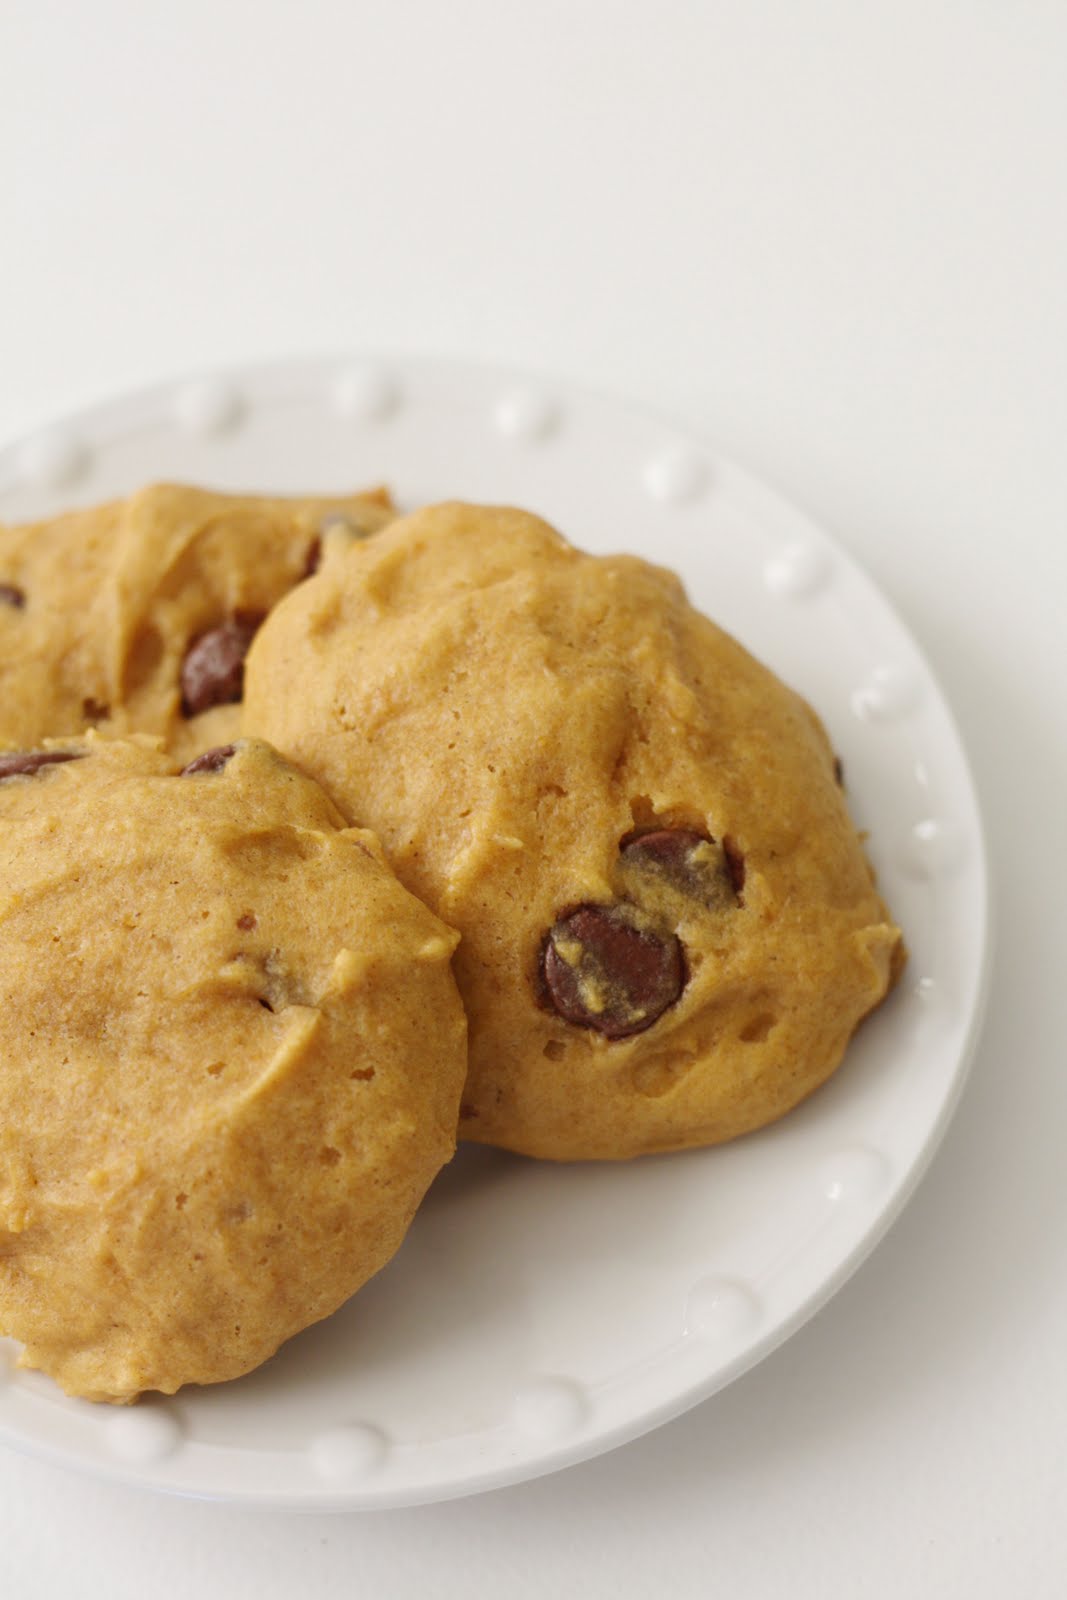 our daily obsessions: :: Deliciousness - pumpkin chocolate chip cookies